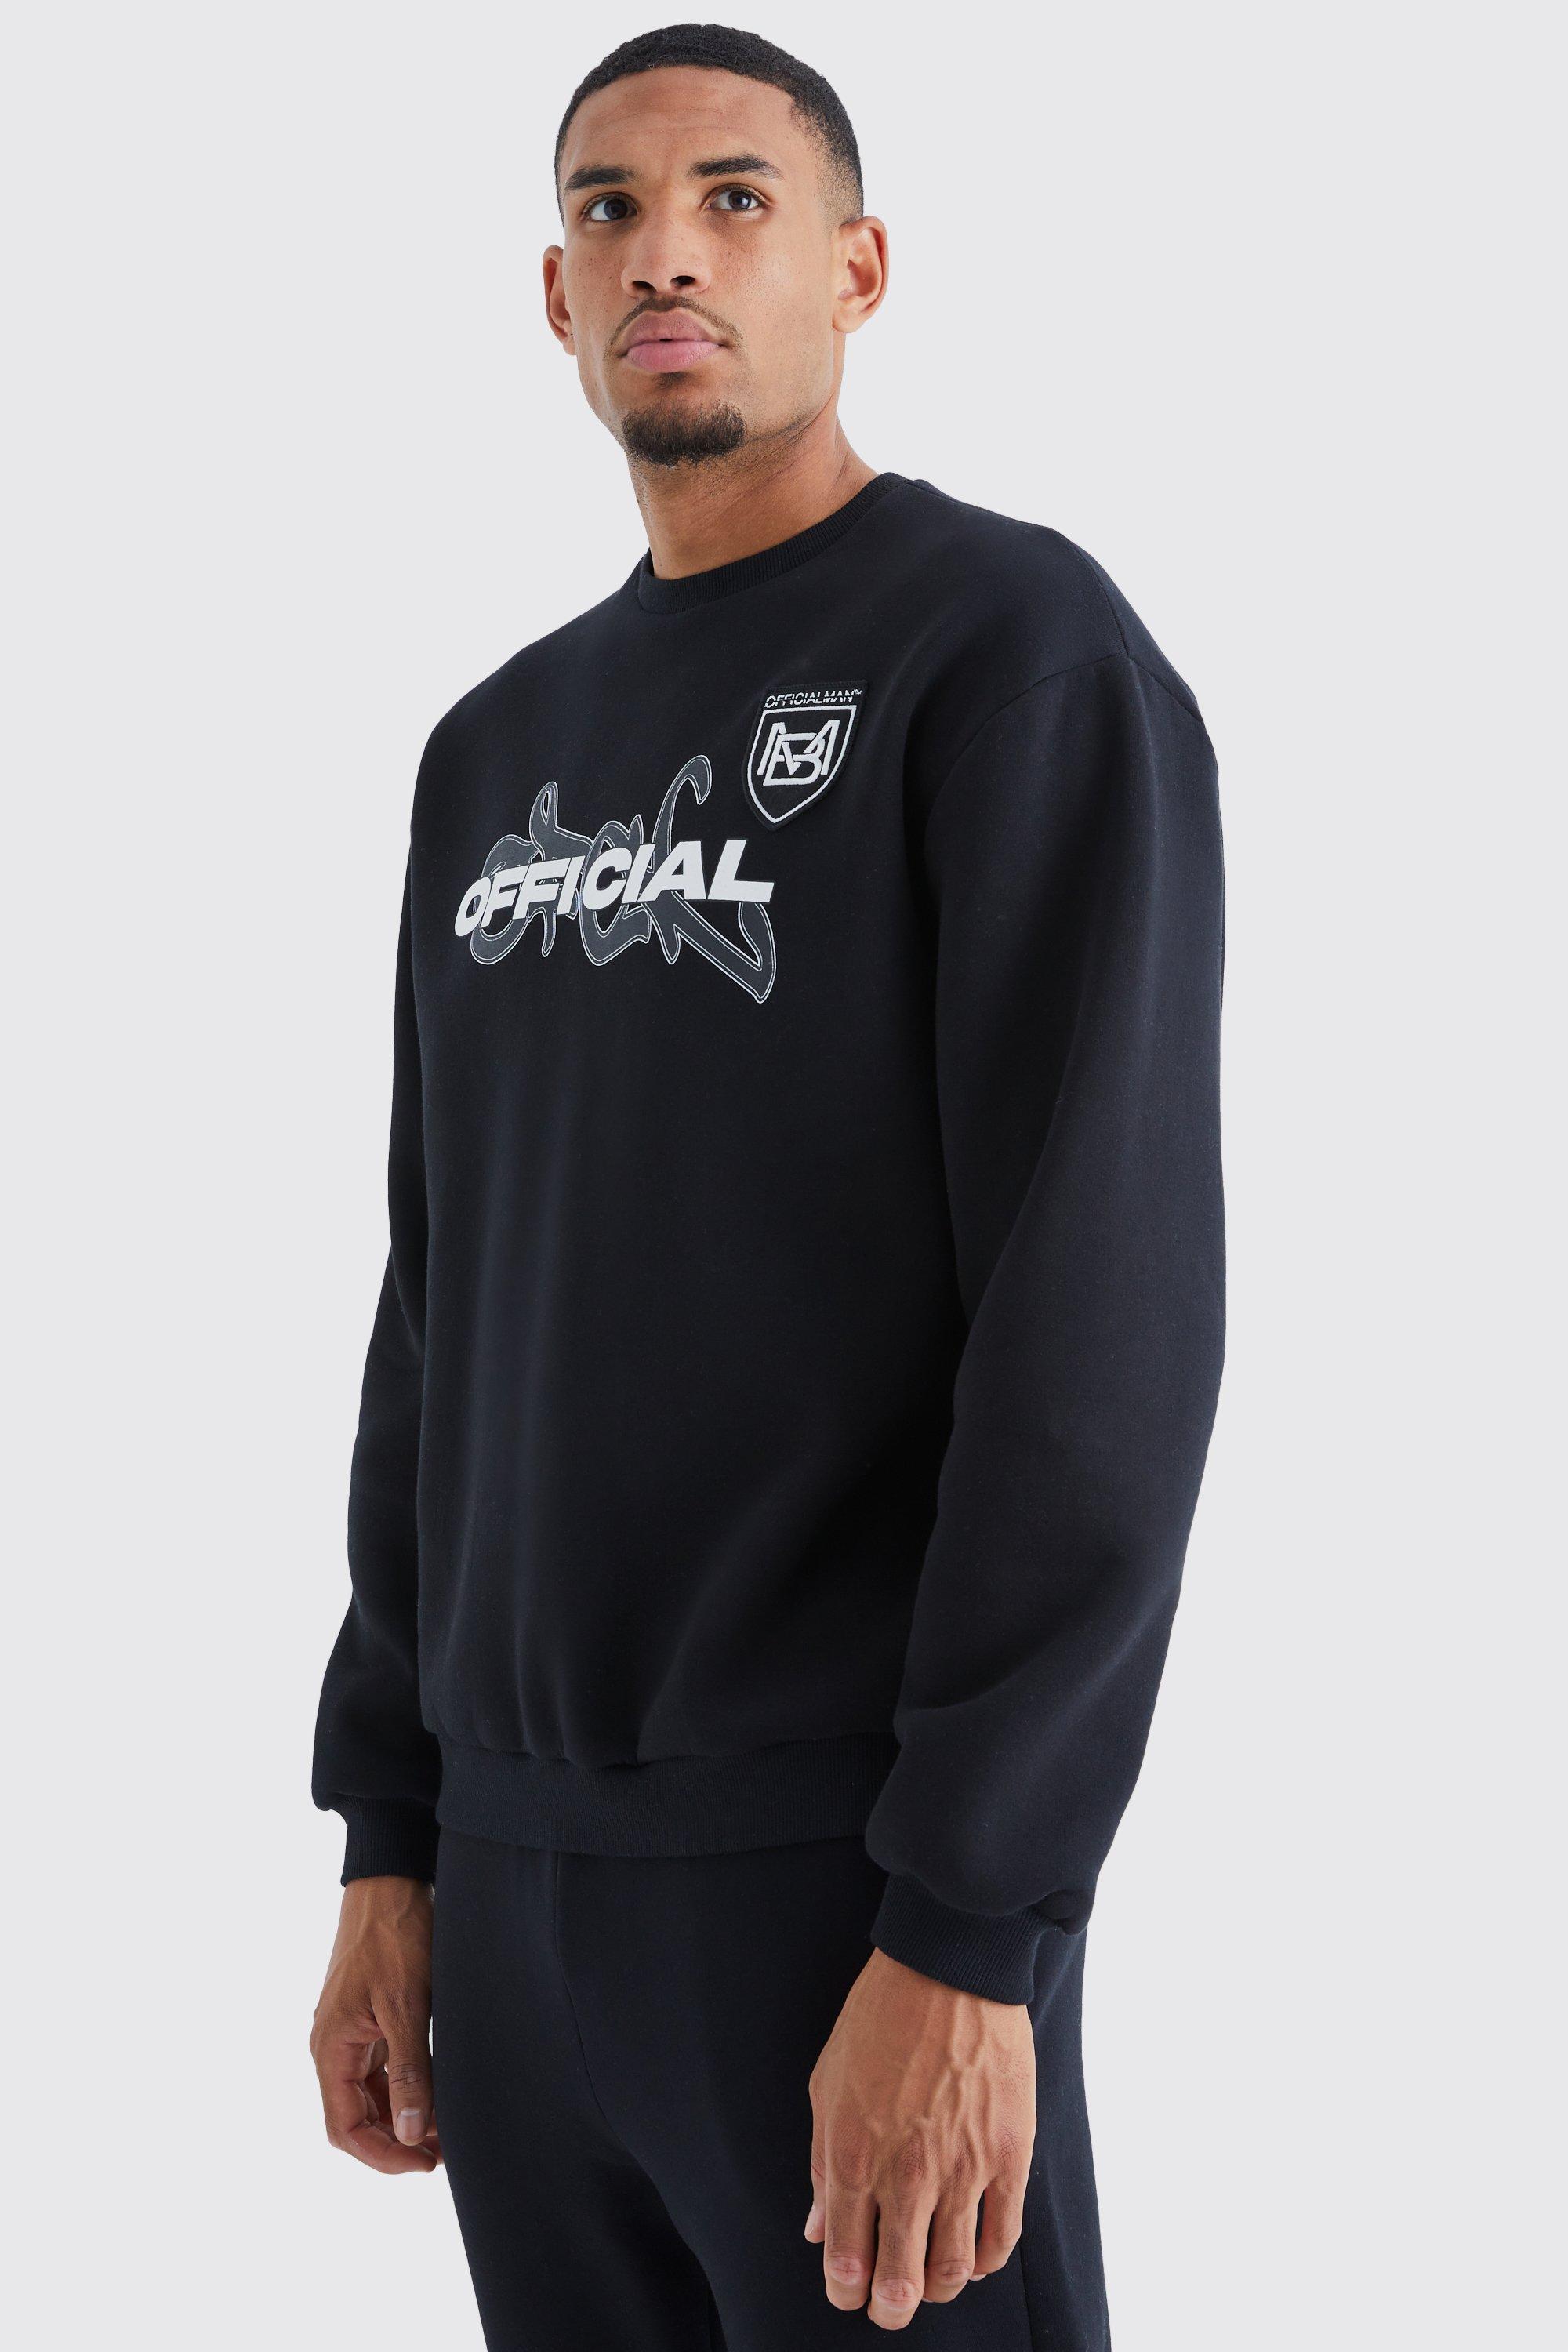 Mens Black Tall Official Oversized Sweat, Black